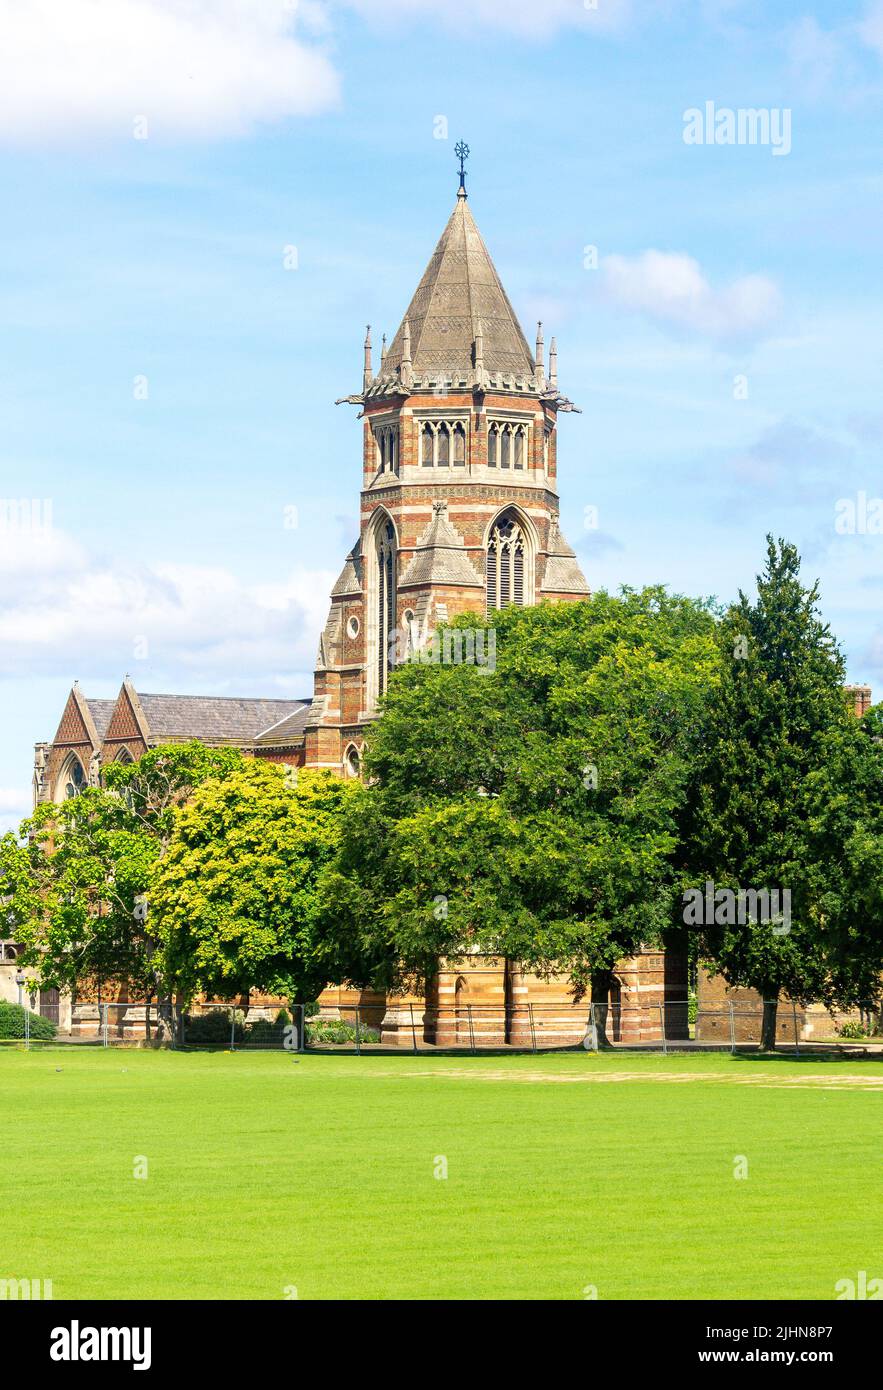 The Chapel and sports fields, Rugby School, Lawrence Sheriff Street, Rugby, Warwickshire, England, United Kingdom Stock Photo